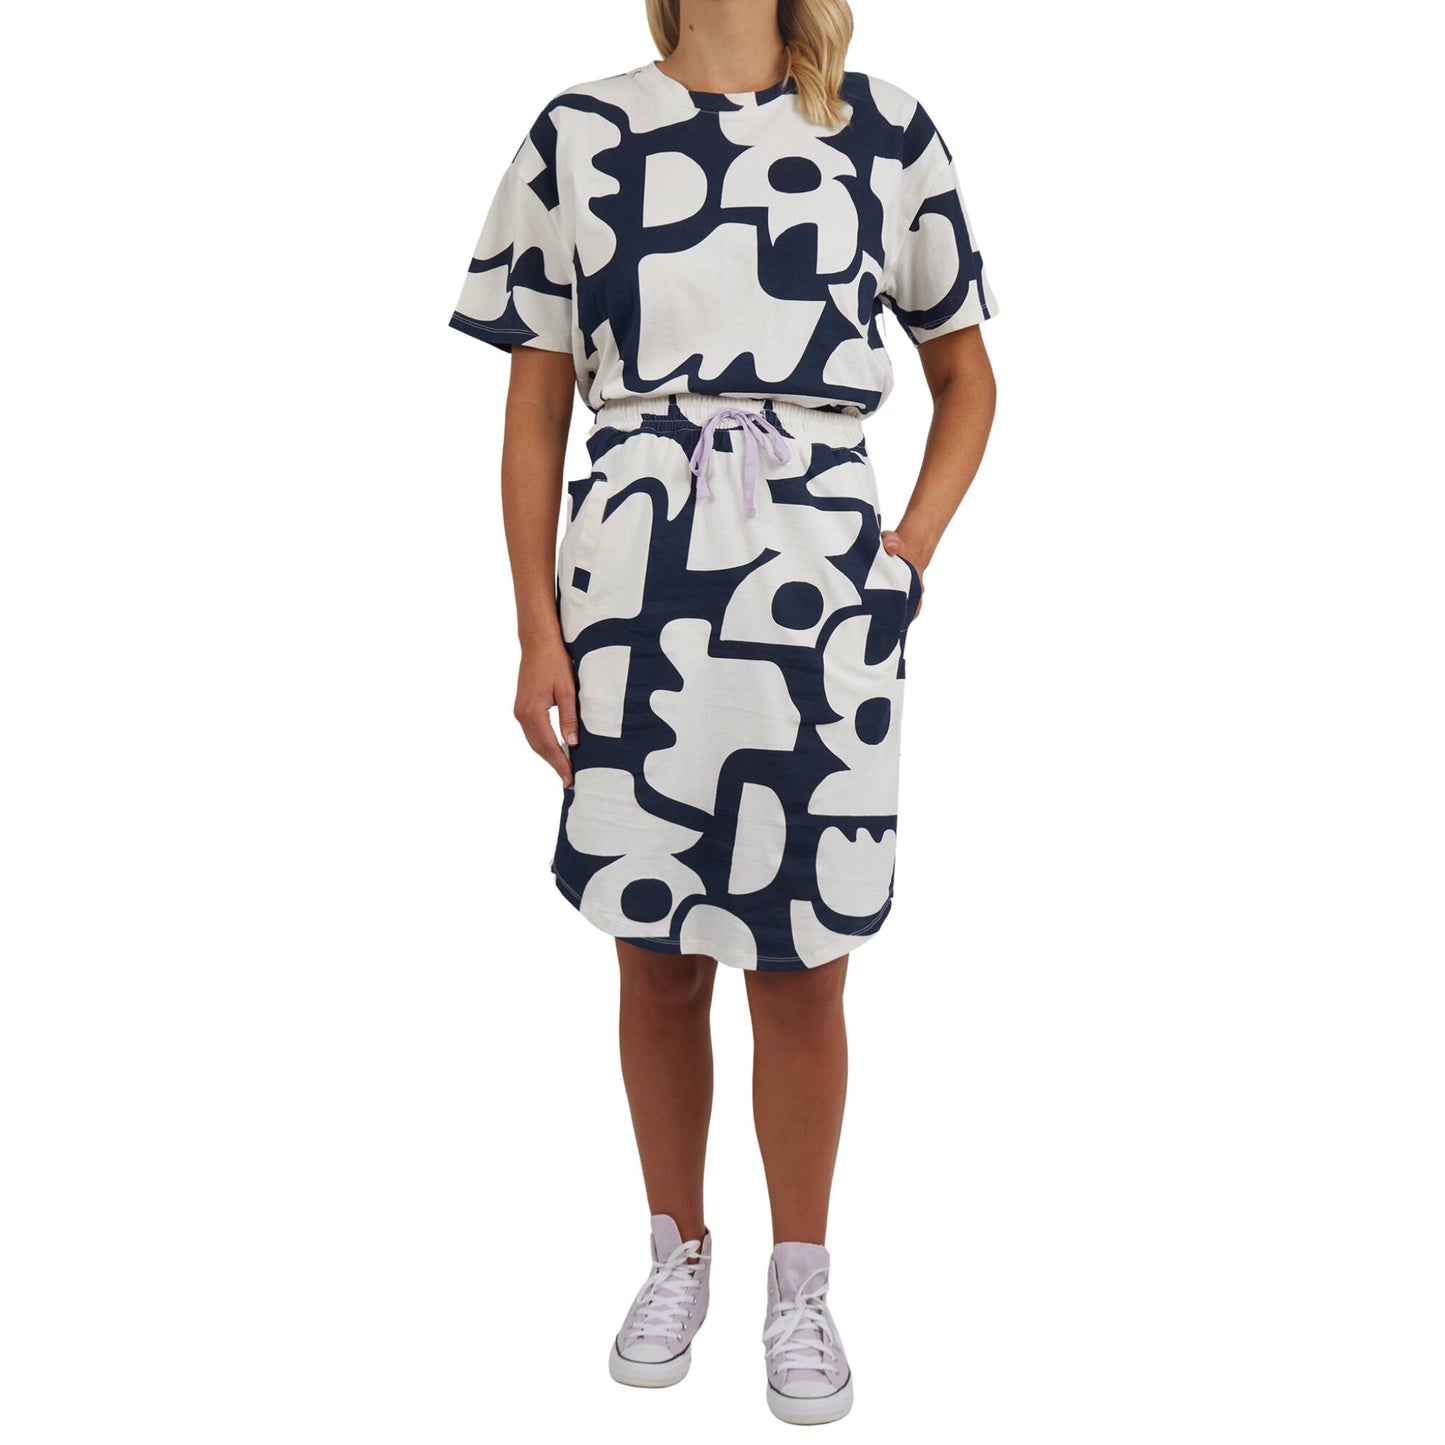 Featuring a gorgeous geometric yardage print in classic navy & white the Miro Skirt from Elm Lifestyle is made from organic cotton . This pull on skirt features side pockets and made is made for comfort.